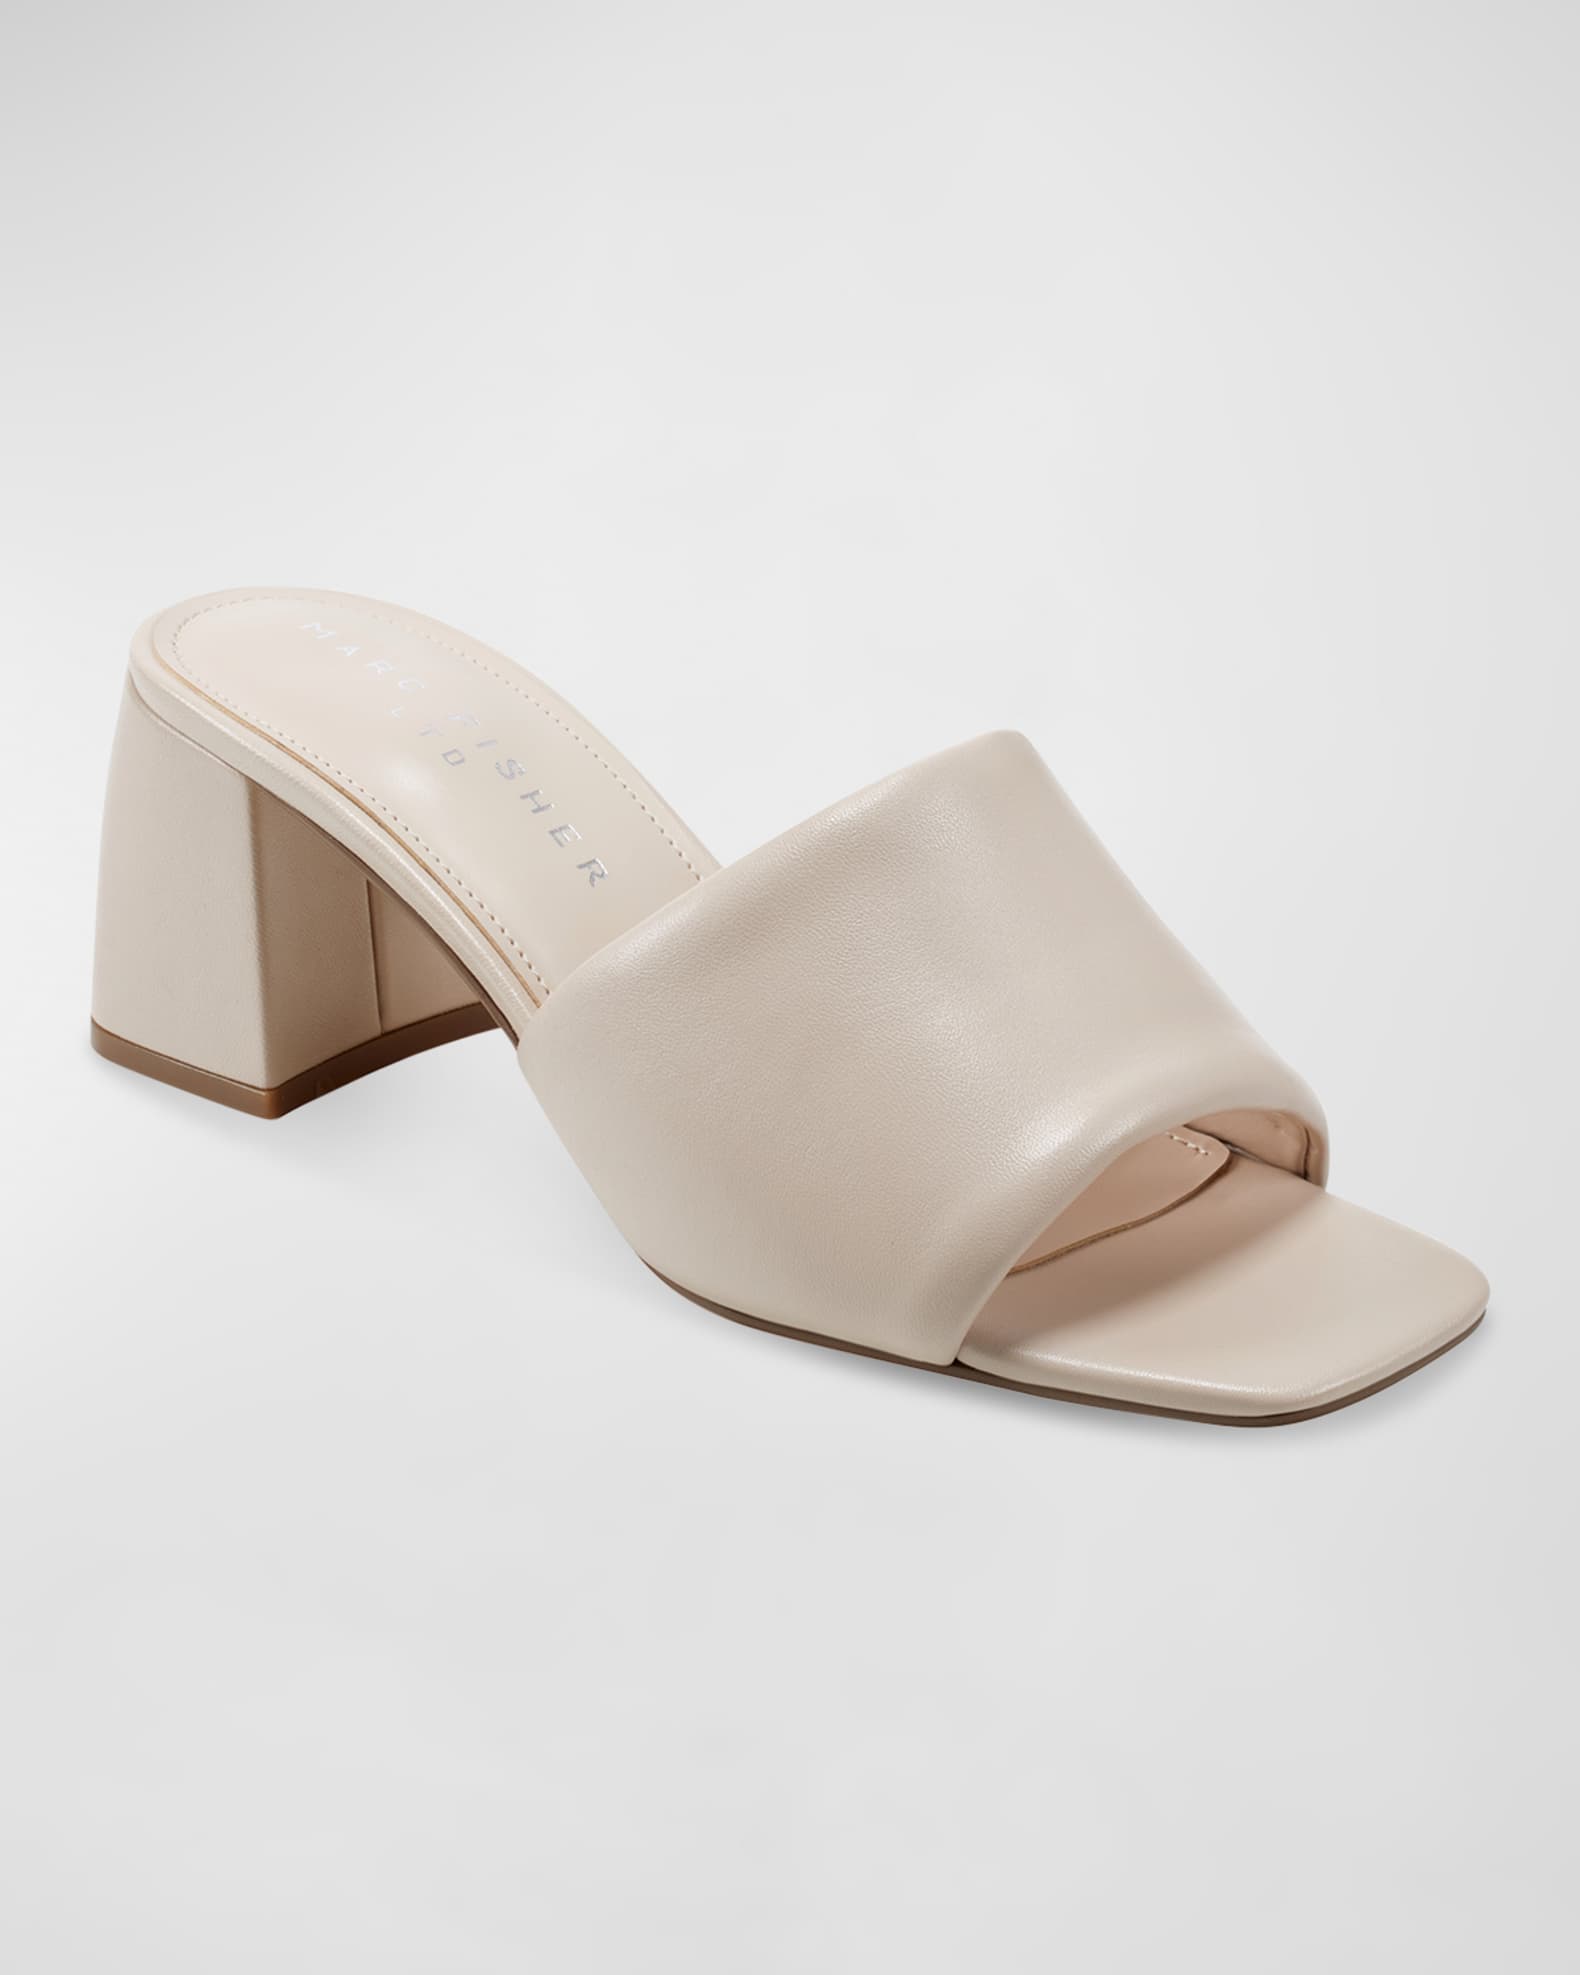 Marc Fisher LTD Nombra Padded Leather Mule Sandals | Neiman Marcus